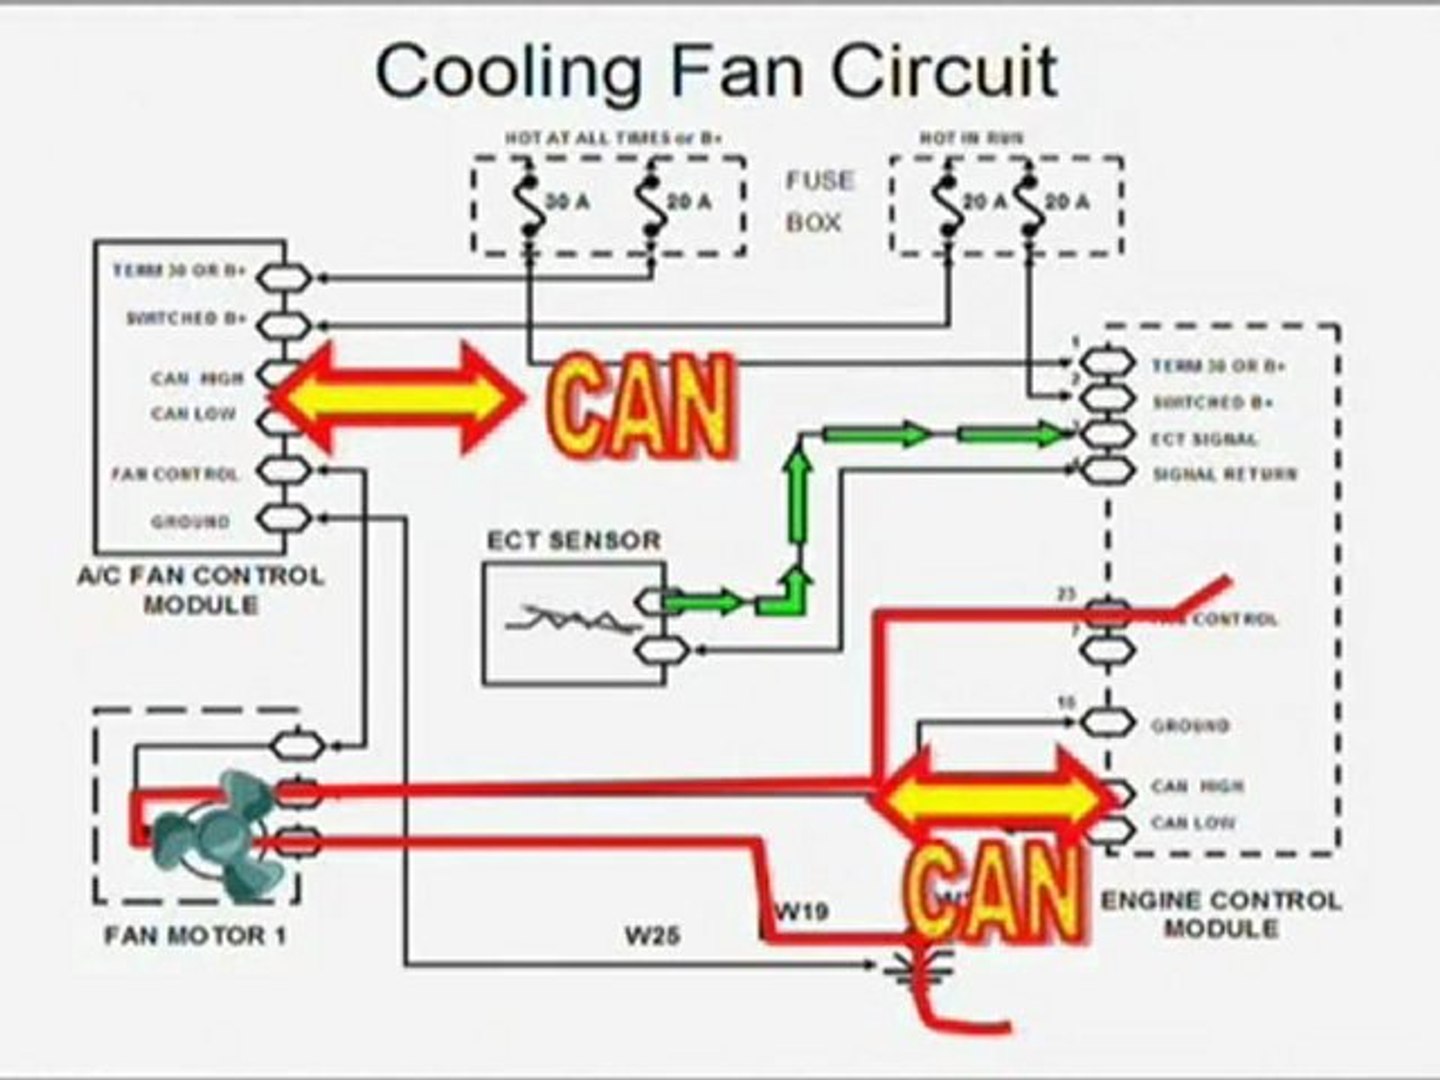 Electric-Cooling-Fan-Wiring-Diagram - video Dailymotion